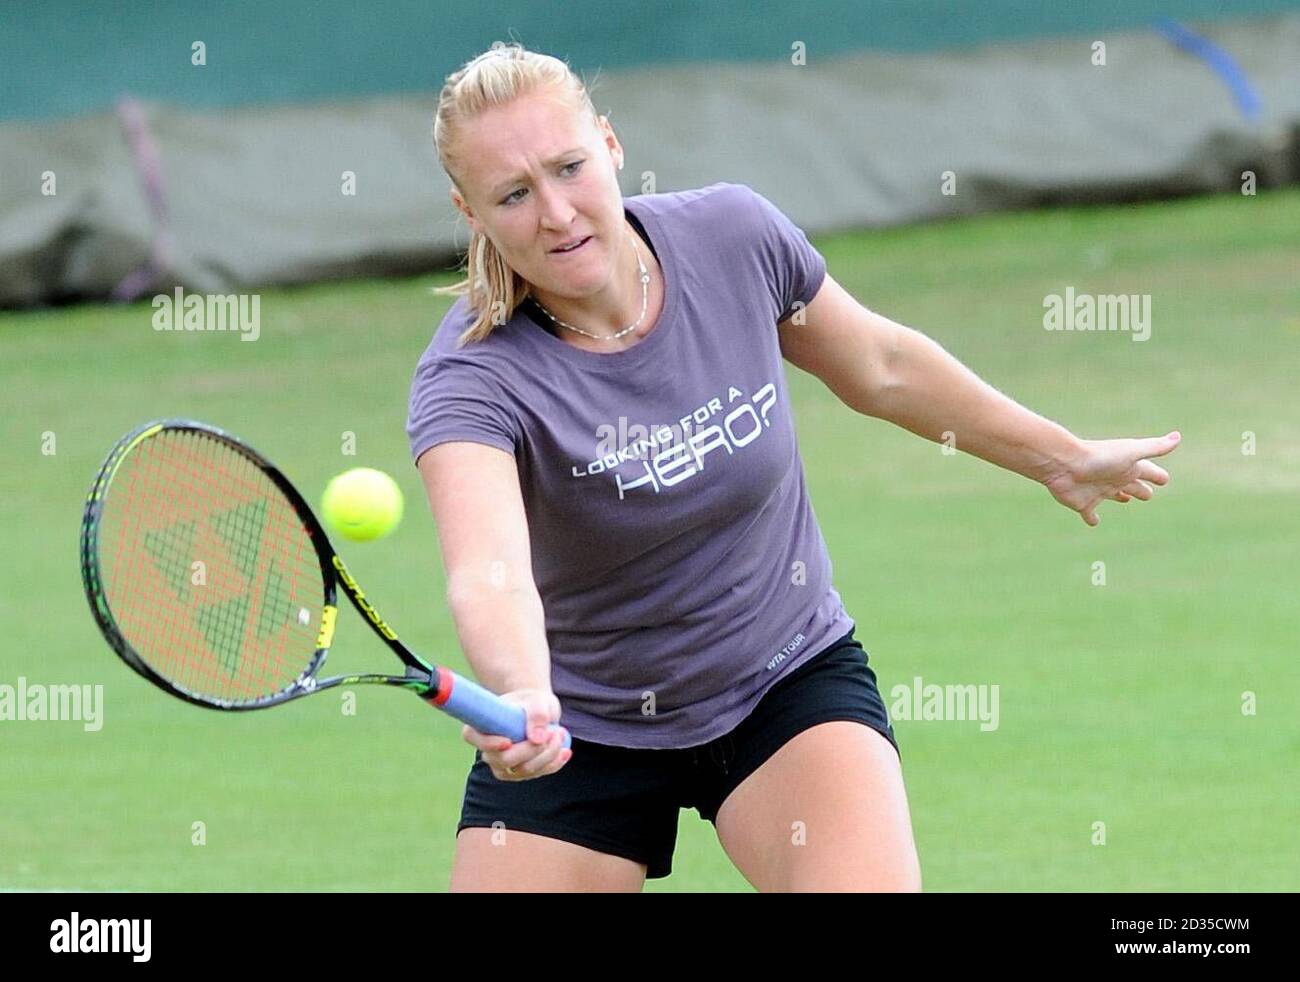 Great Britain's Elena Baltacha in action during a practice session for the Wimbledon Championships 2008 at the All England tennis Club in Wimbledon. Stock Photo